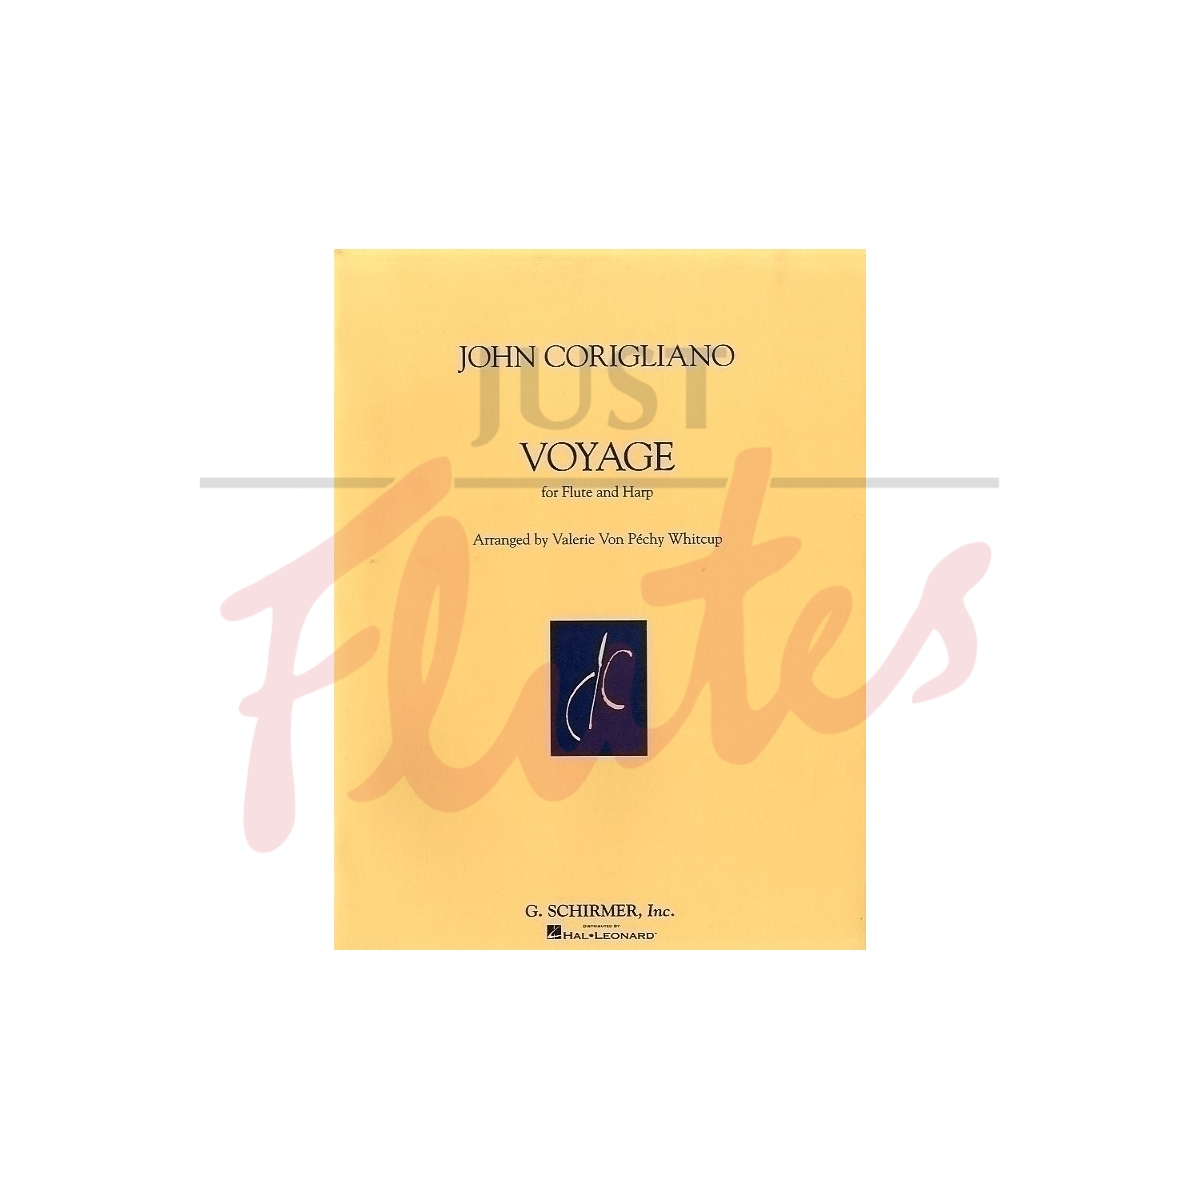 Voyage for Flute and Harp